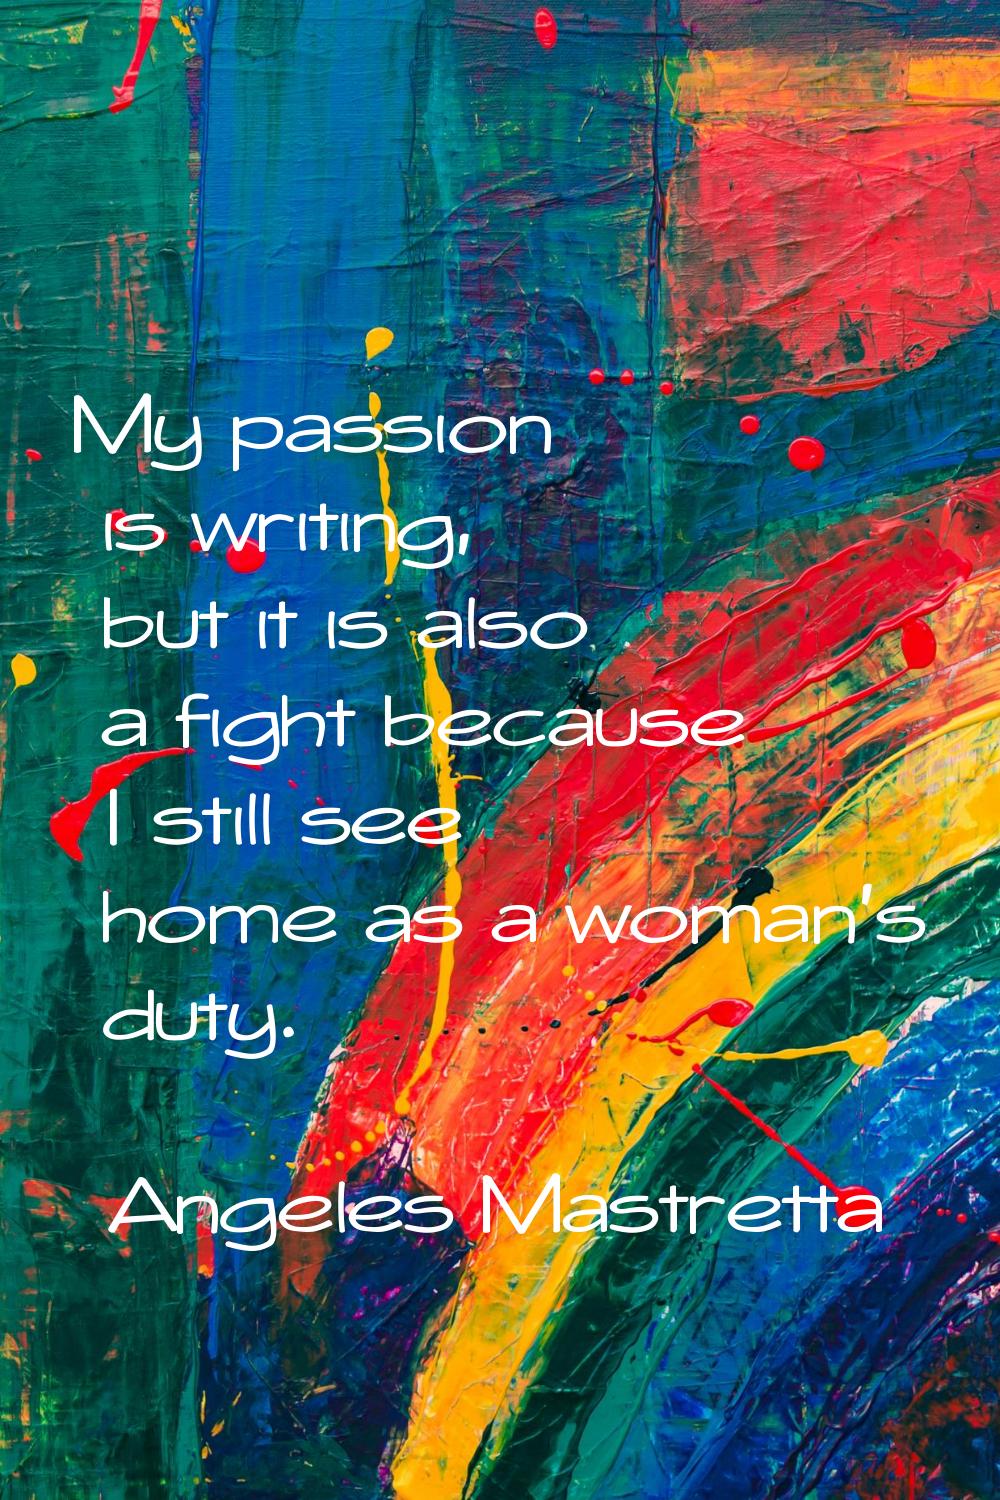 My passion is writing, but it is also a fight because I still see home as a woman's duty.